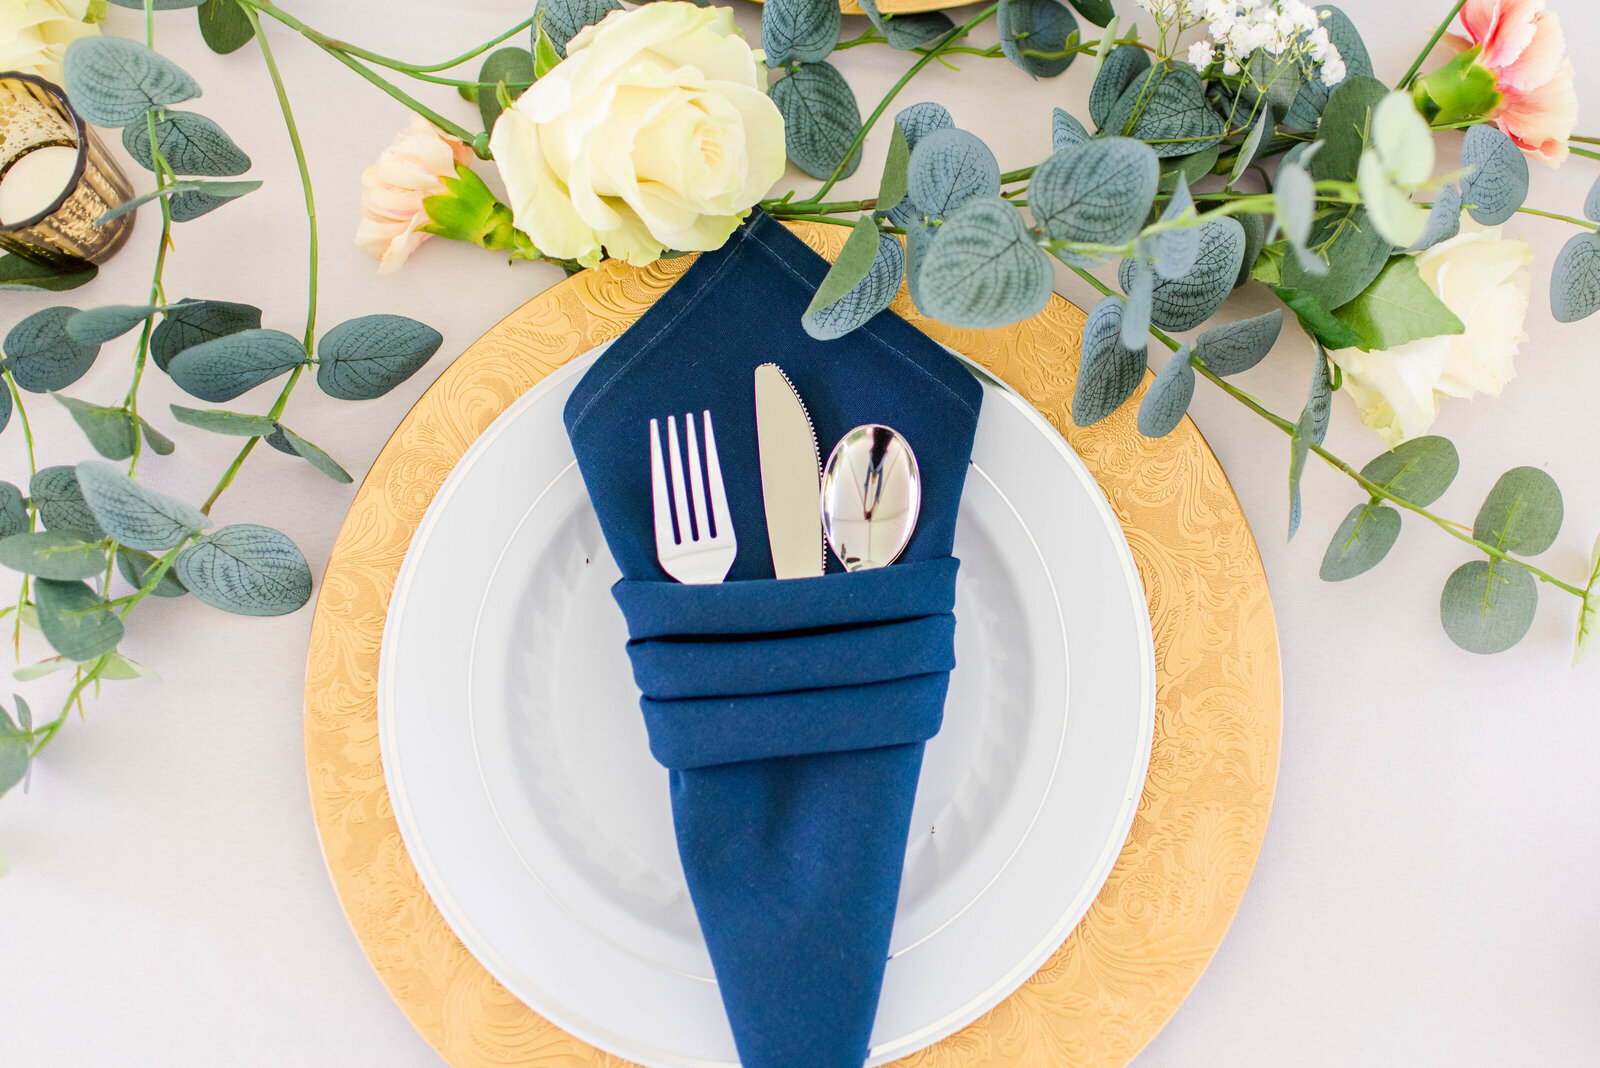 table setting with a blue napkin, silverware, and a white plate